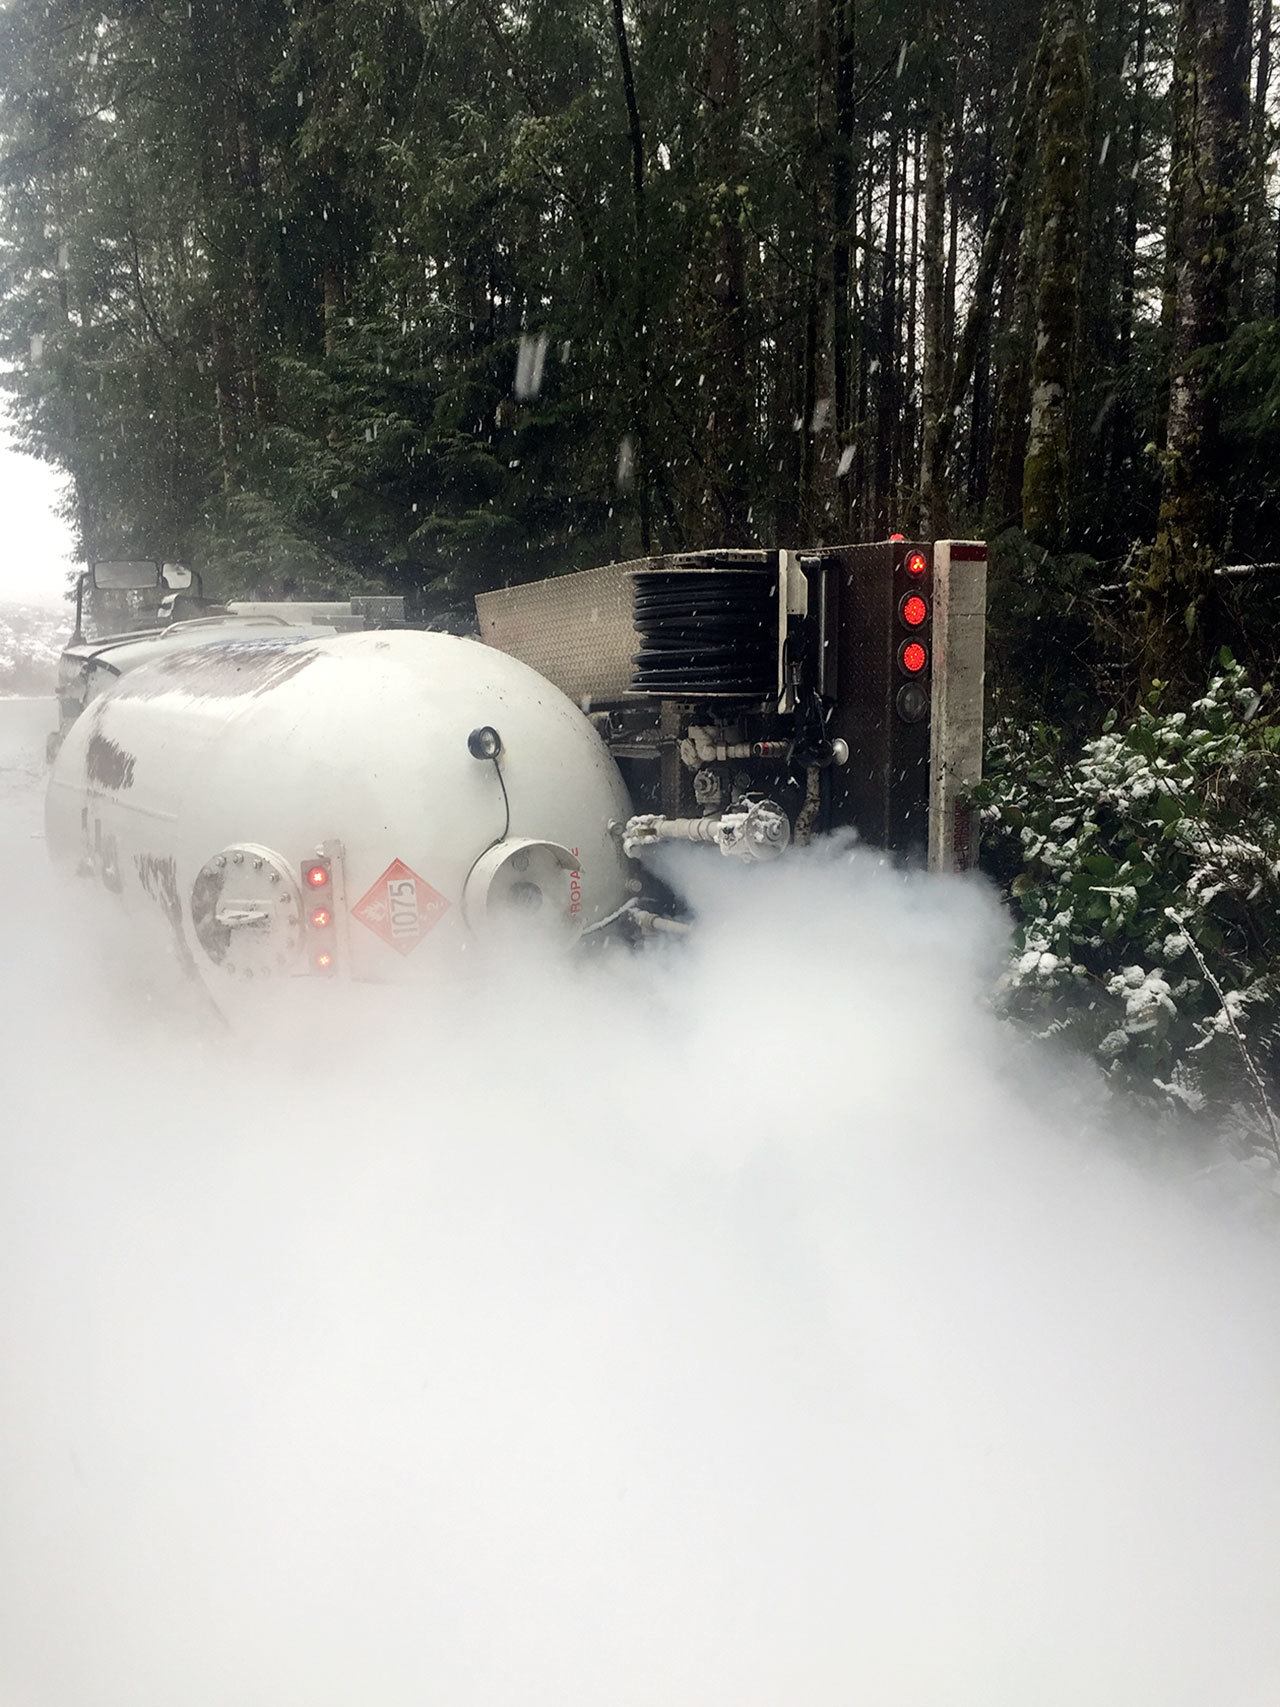 A truck carrying 2,500 gallons of propane overturned at 1057 Teal Lake Road at about 12:26 p.m. Wednesday. The driver escaped without injury.